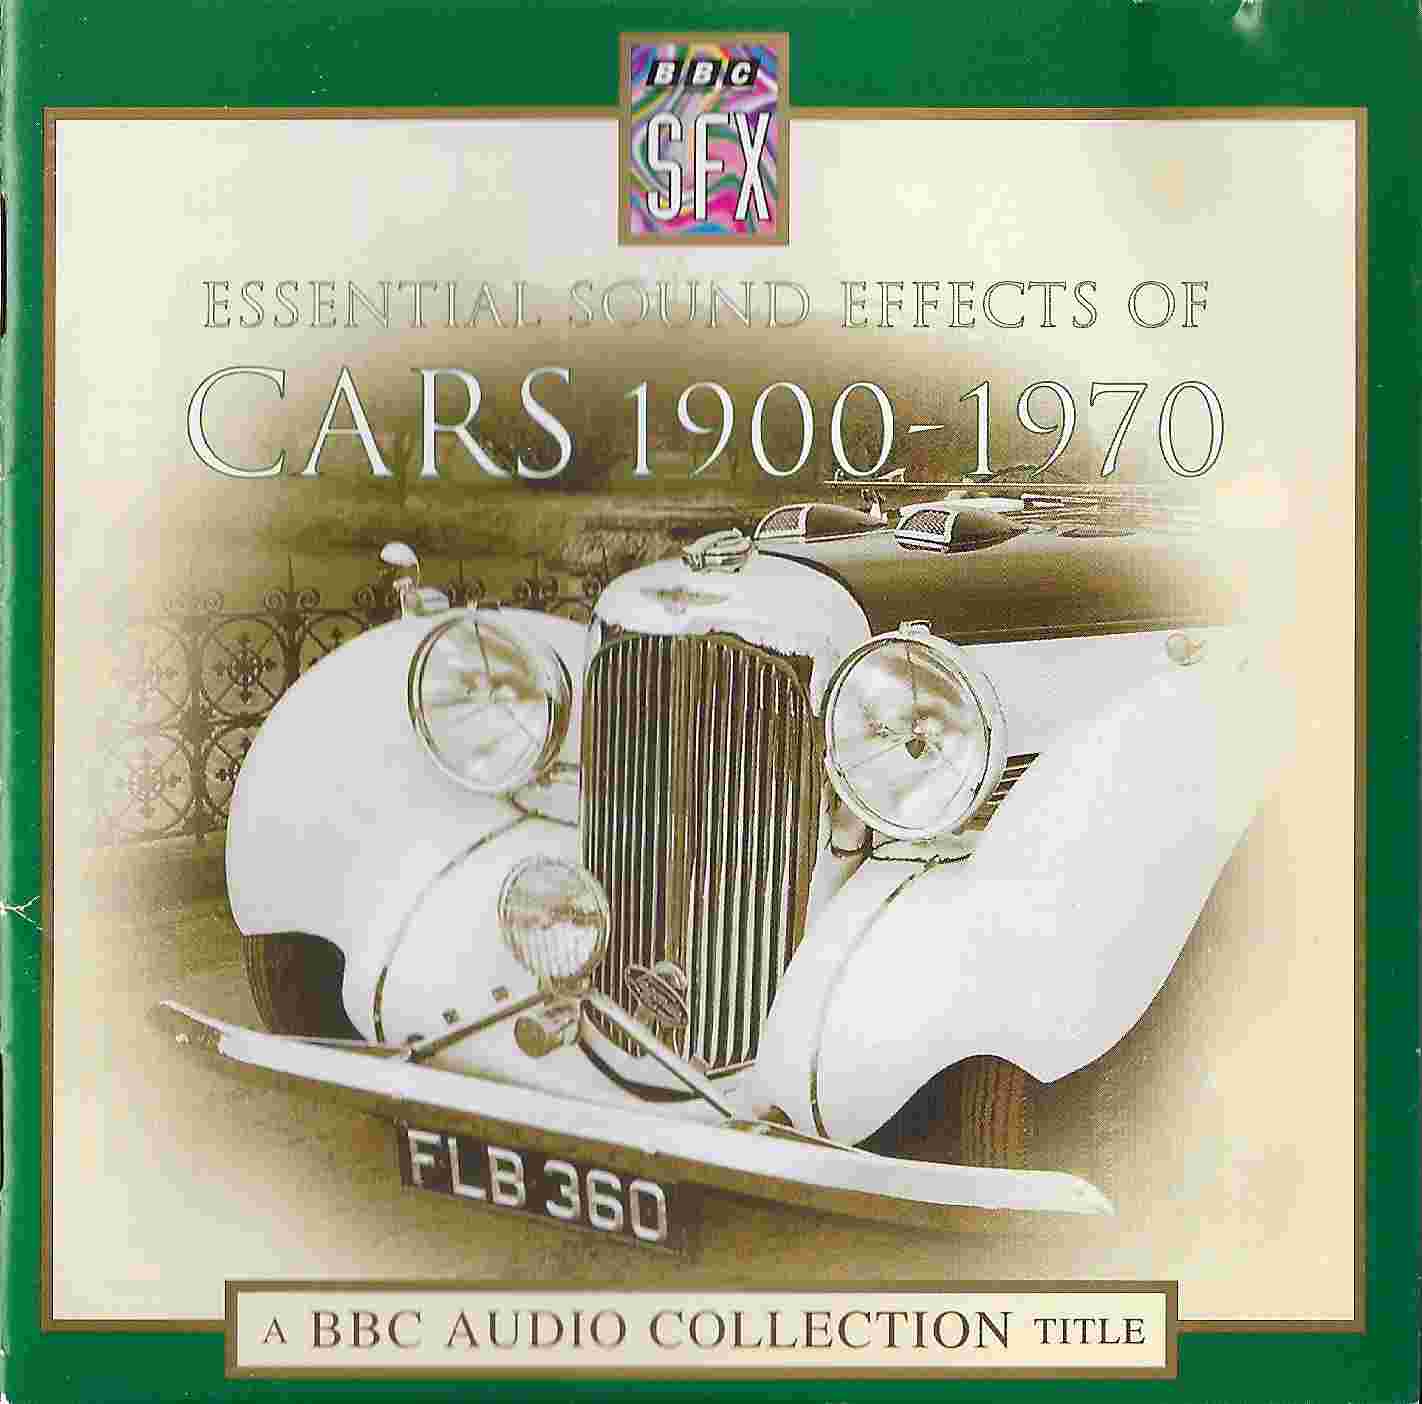 Picture of Essential sound effects of cars 1900 - 1970 by artist Various from the BBC cds - Records and Tapes library